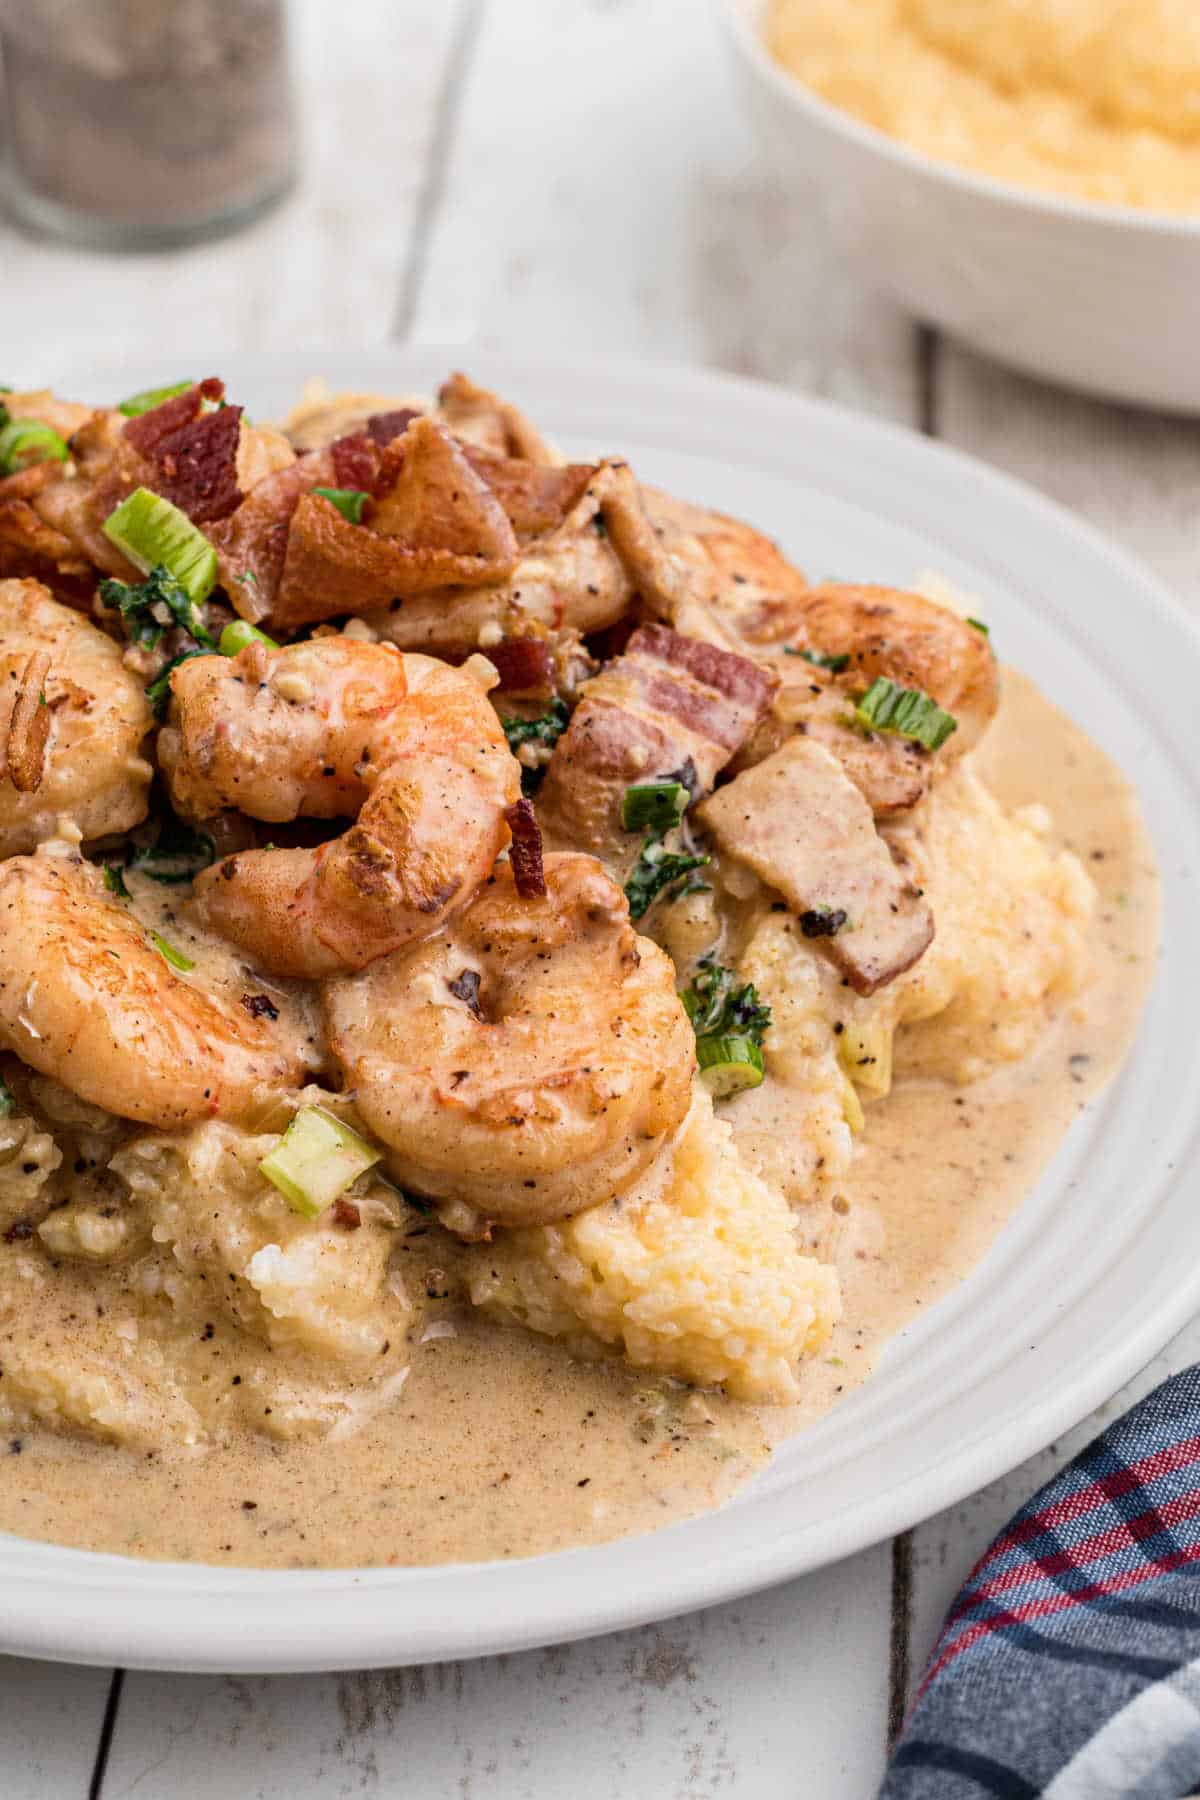 Side shot of a plate of creole shrimp and grits, up close.